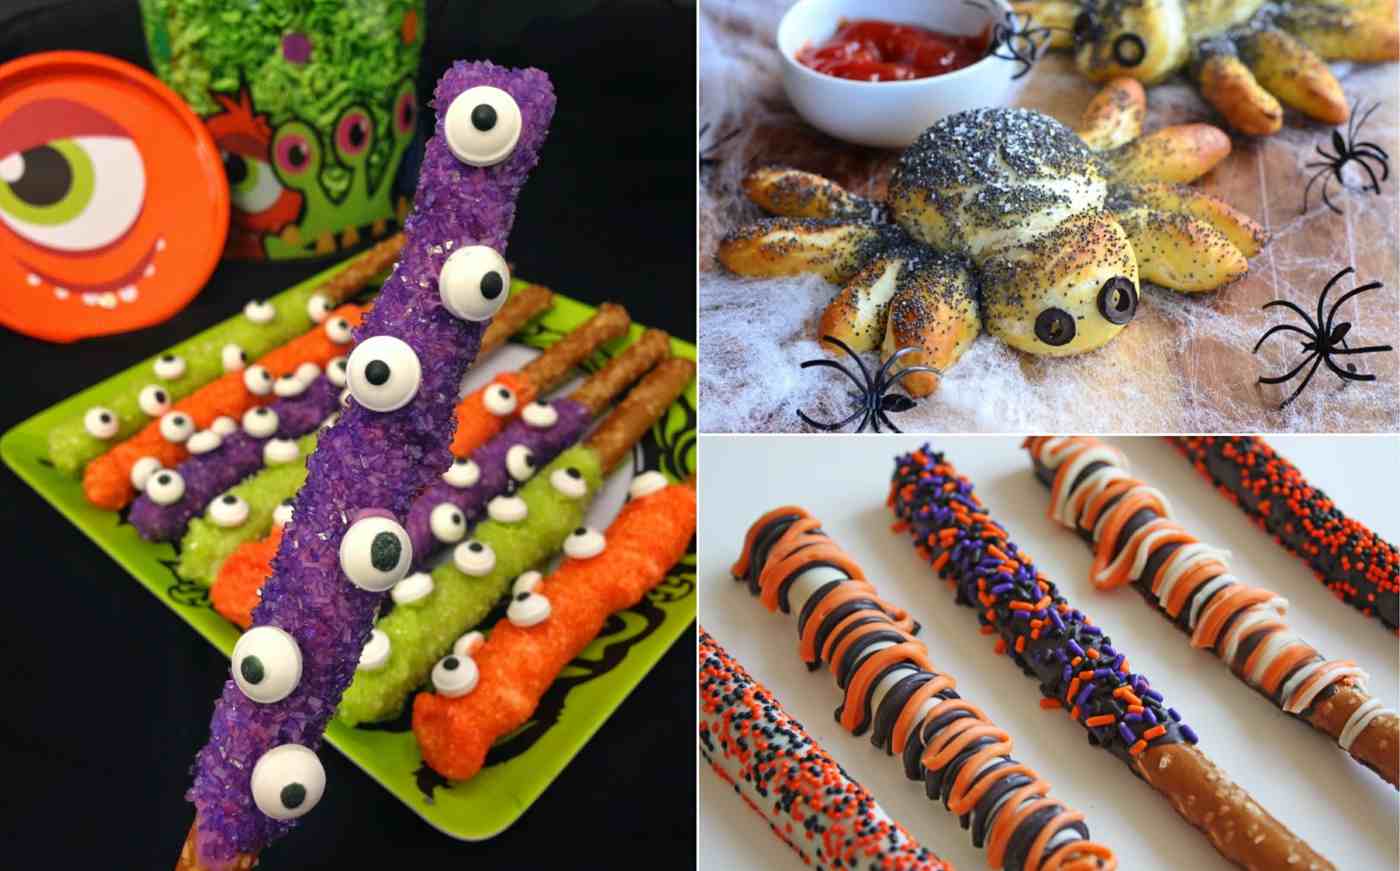 Halloween ideas with embellished rods and homemade spiders with poppy